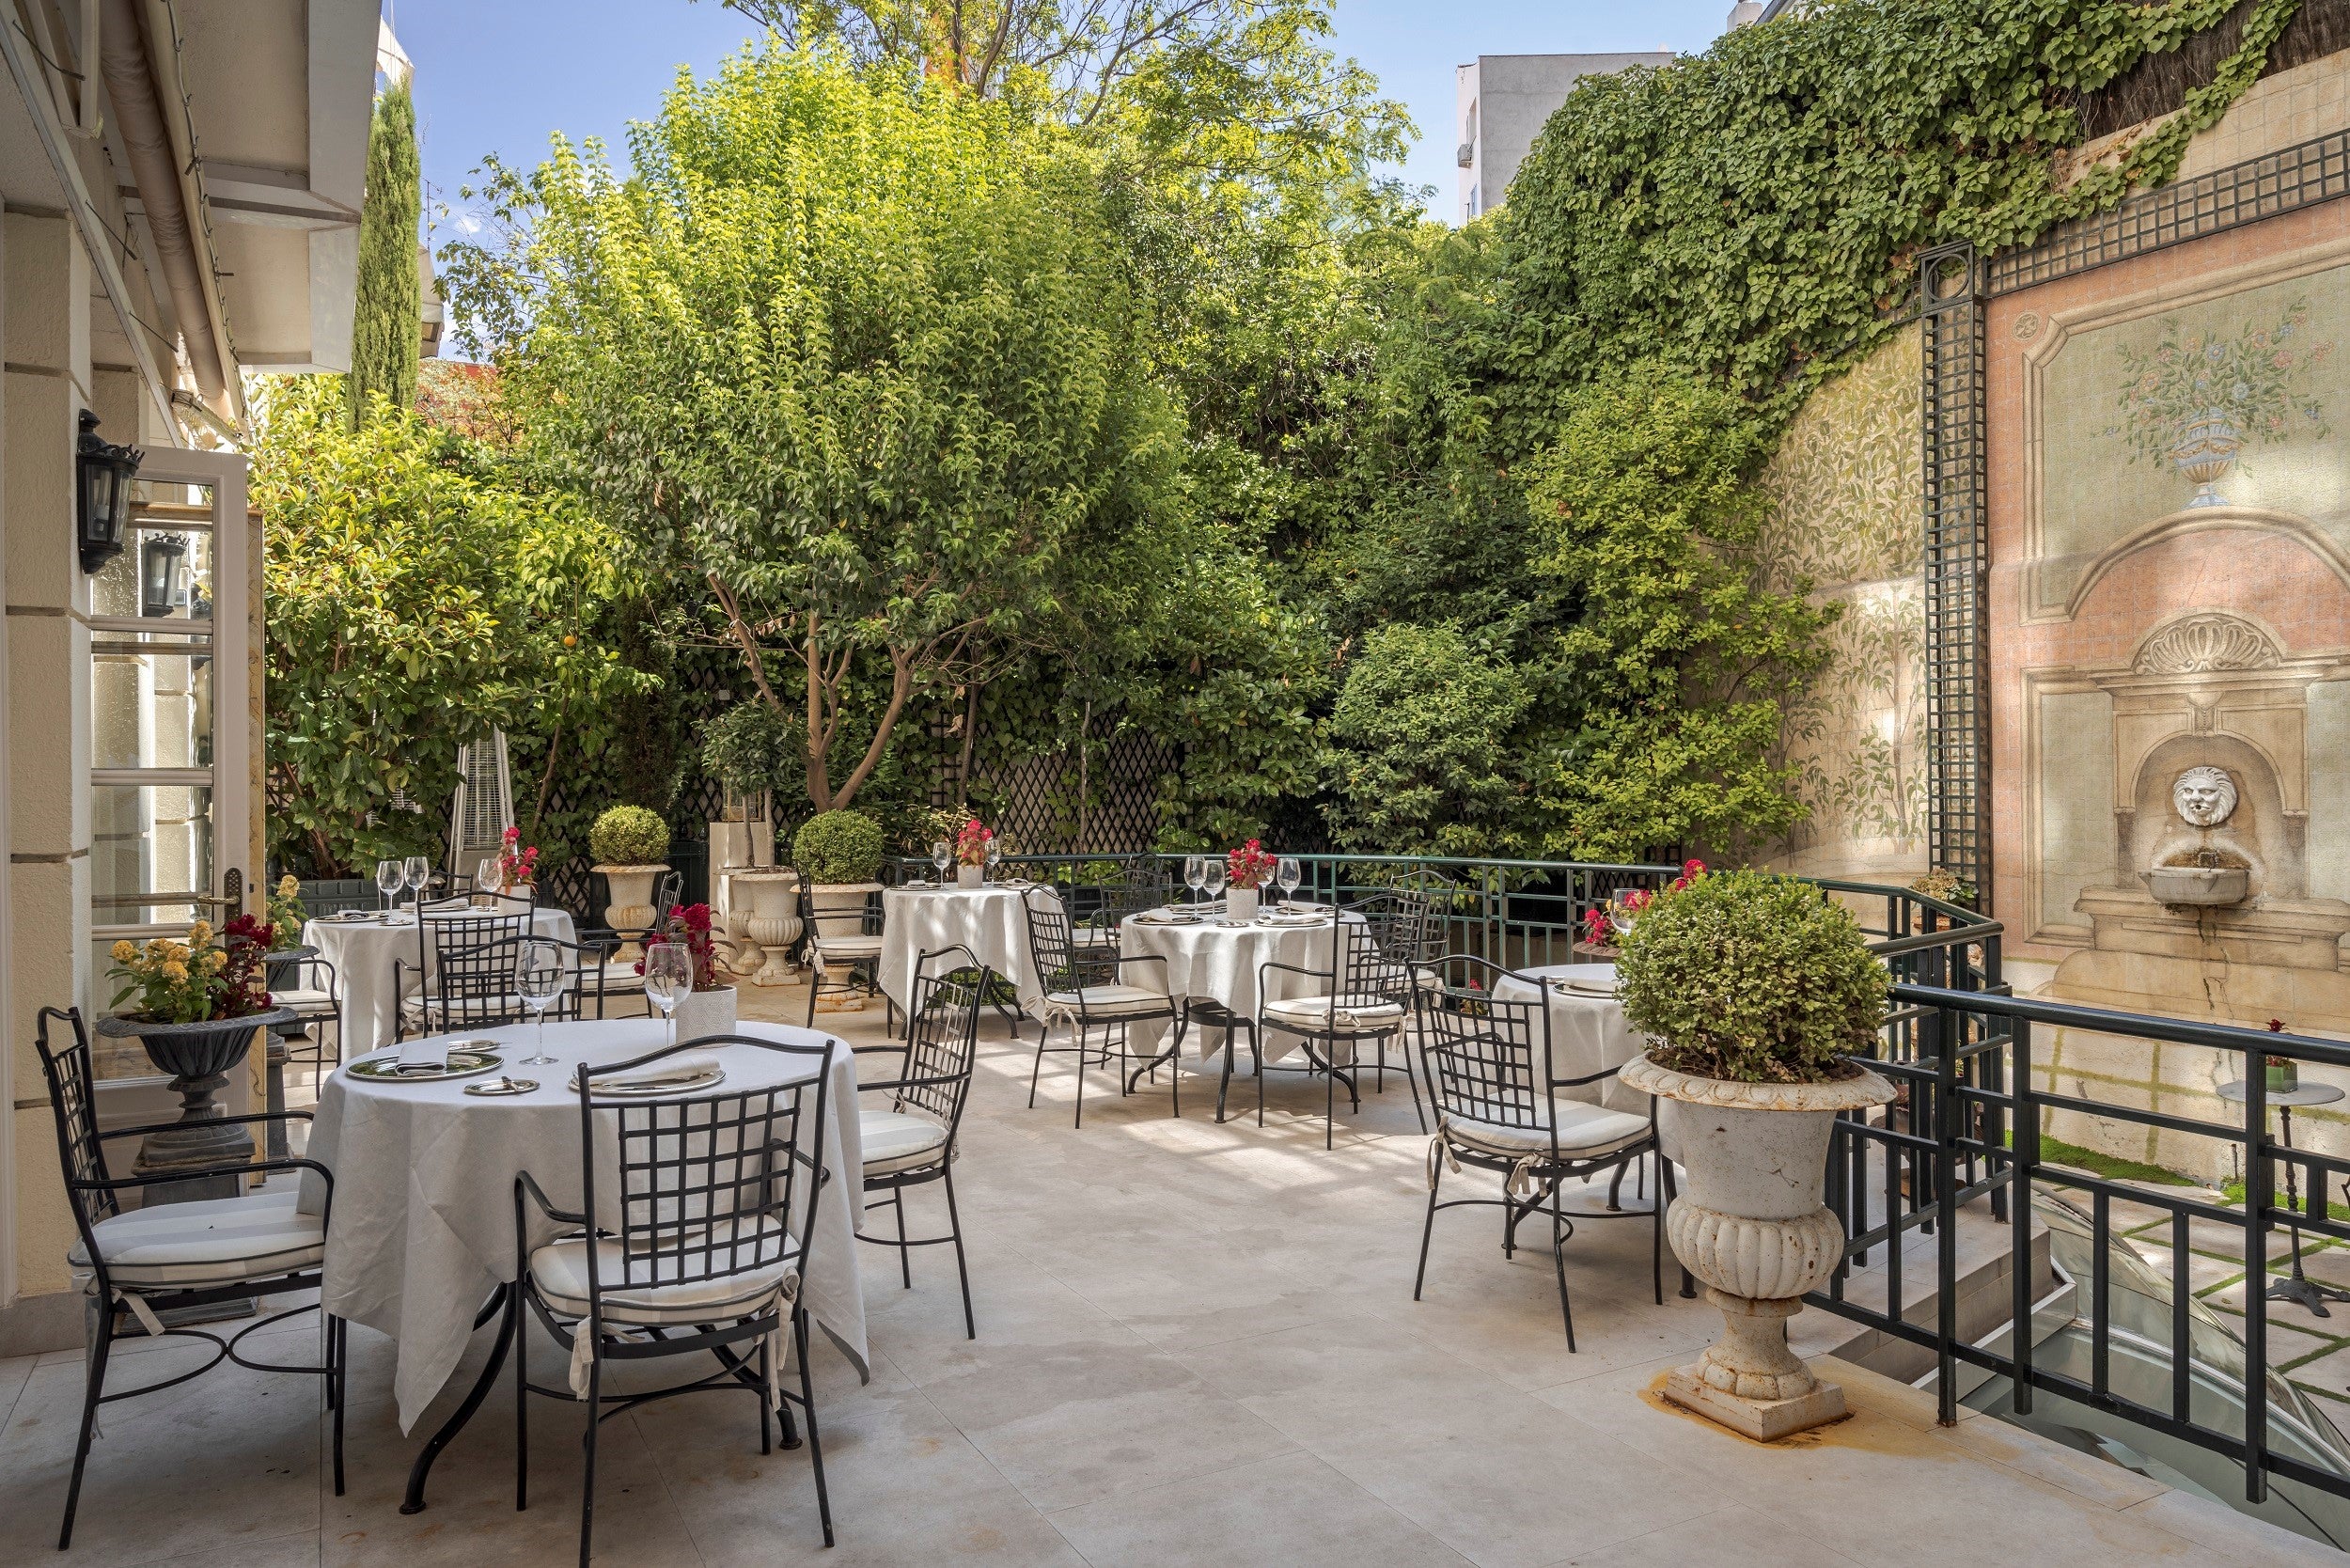 Relax in the refined Italianate terrace